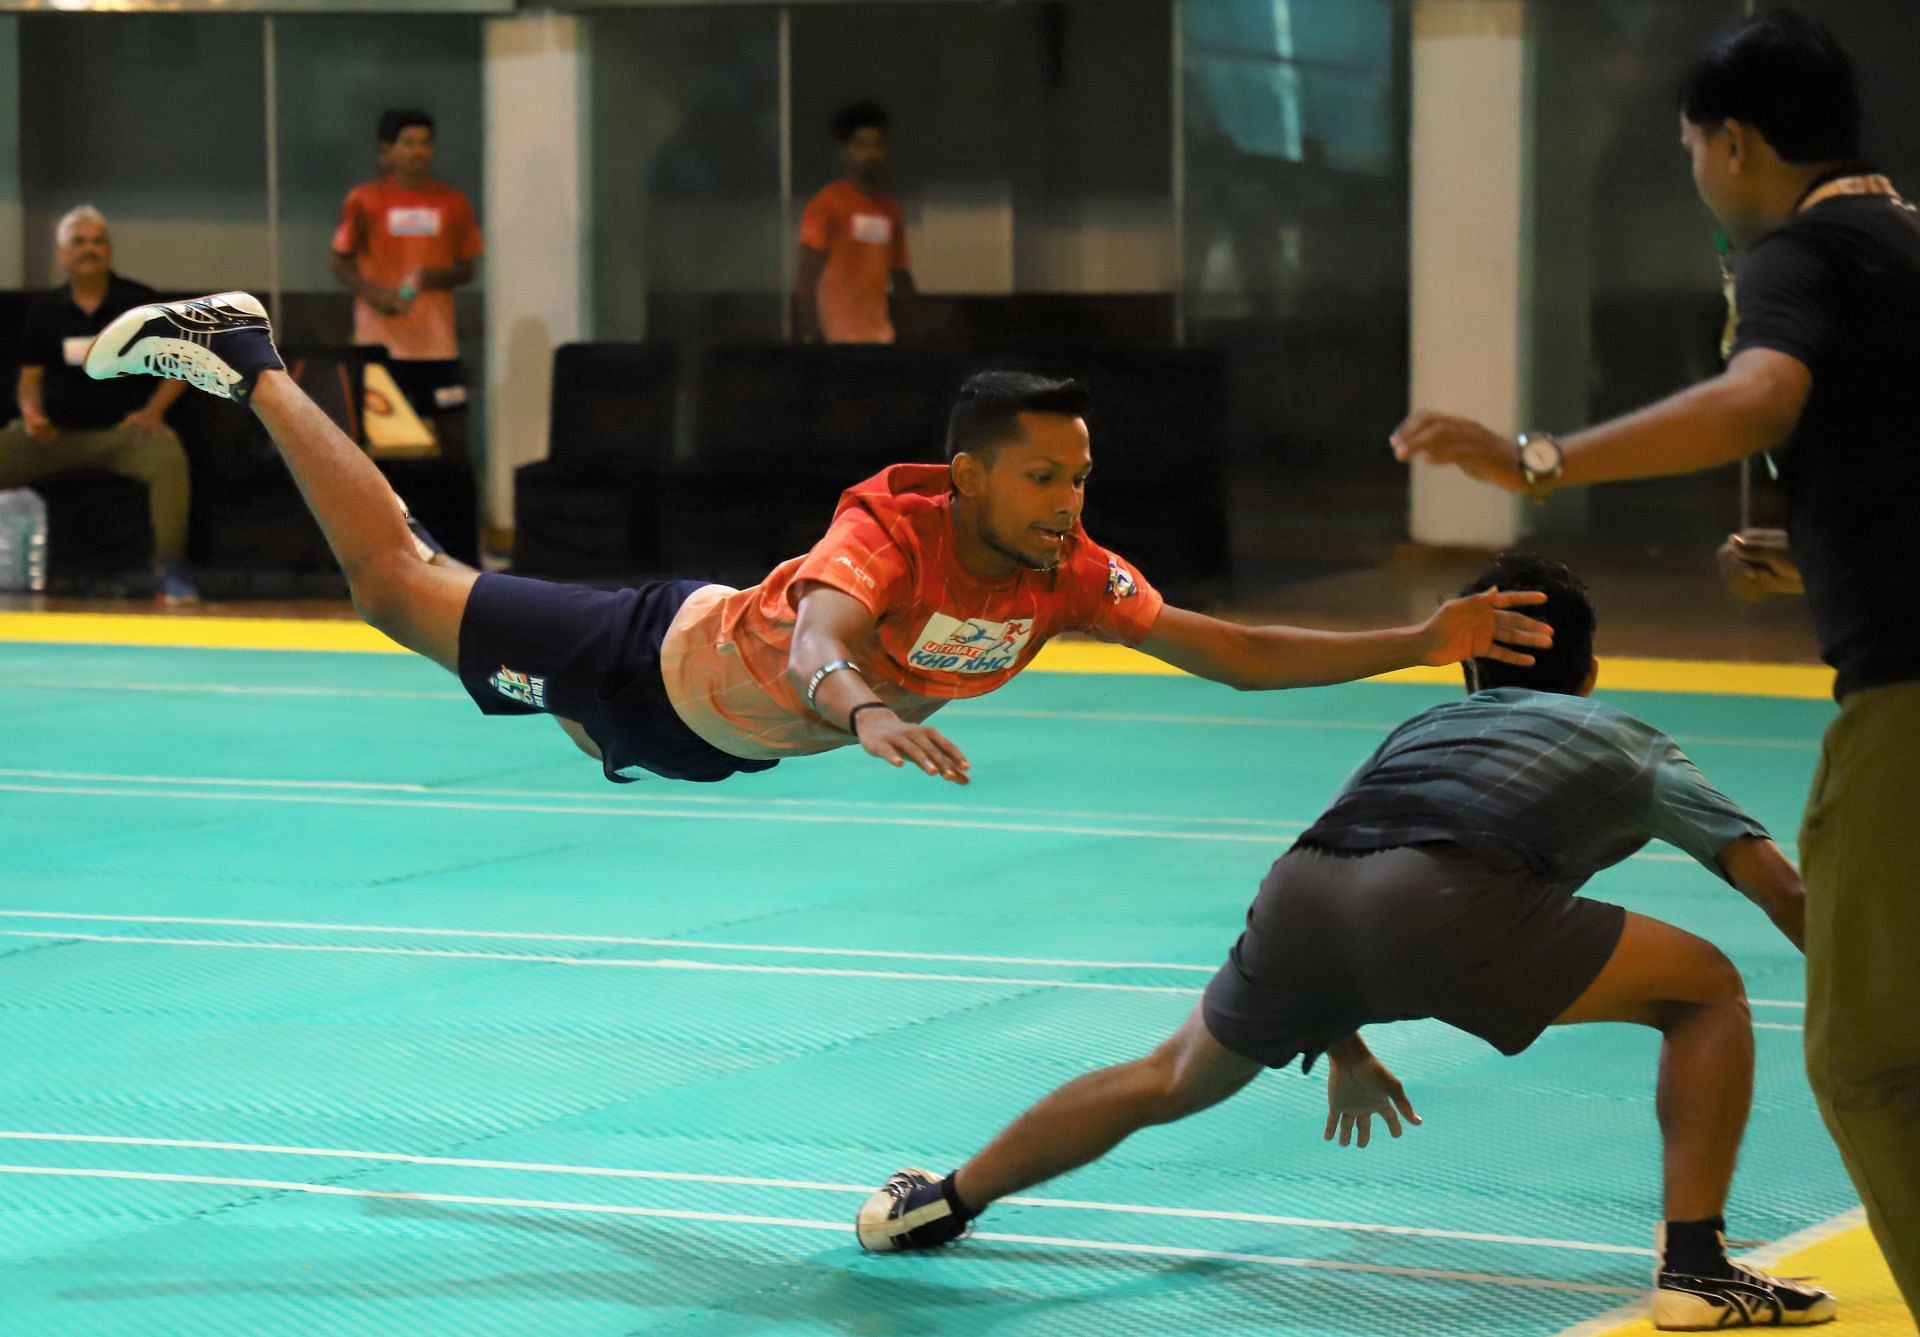 The Ultimate Kho Kho League will get underway later this year. (Pic credit: UKK)